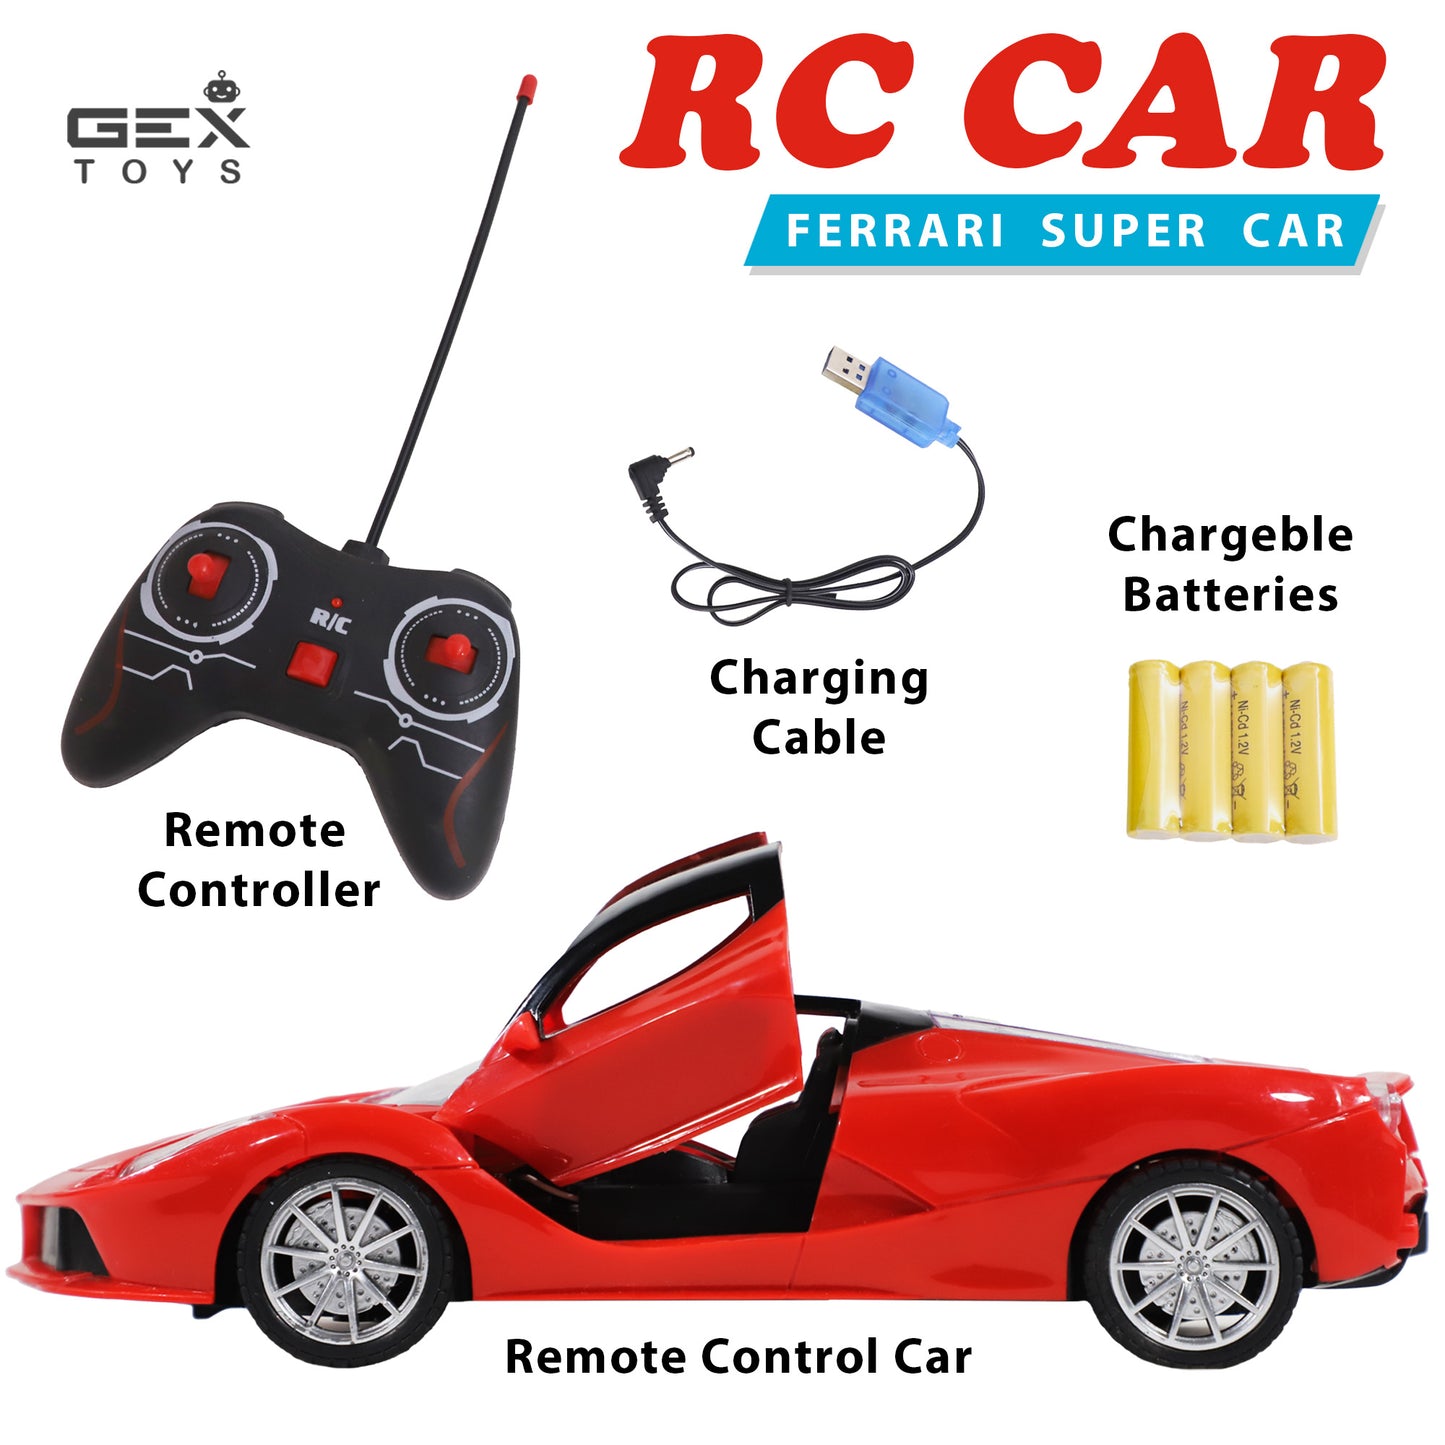 RC Super Car Racing Toys for Kids | Red Color | Kids RC Cars